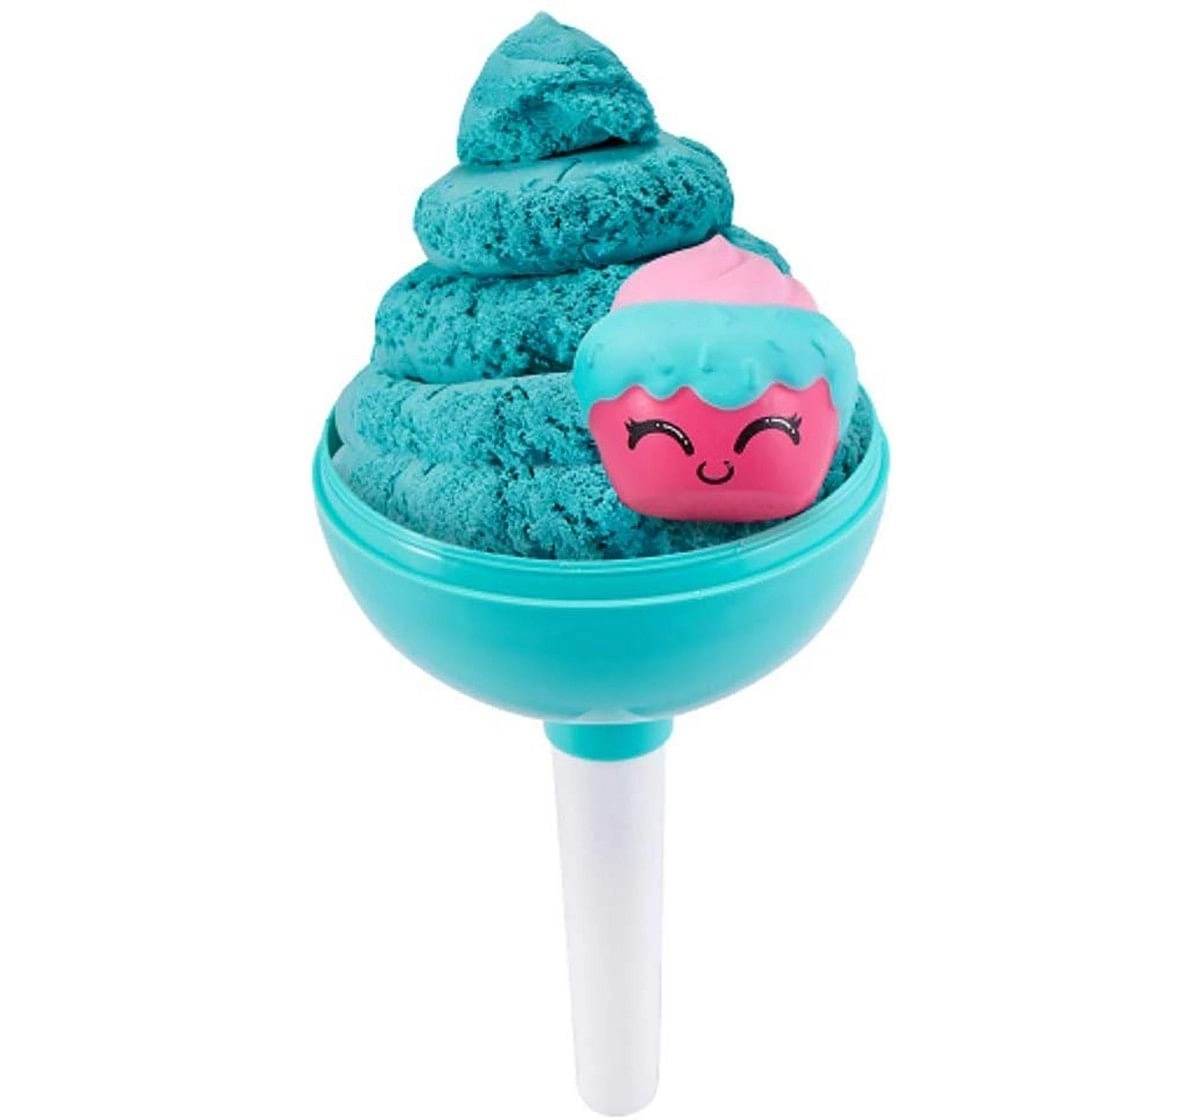 Oosh Zuru  Cotton Candy Cuties, Medium Series 1 Sand, Slime & Others for Kids age 3Y+ 